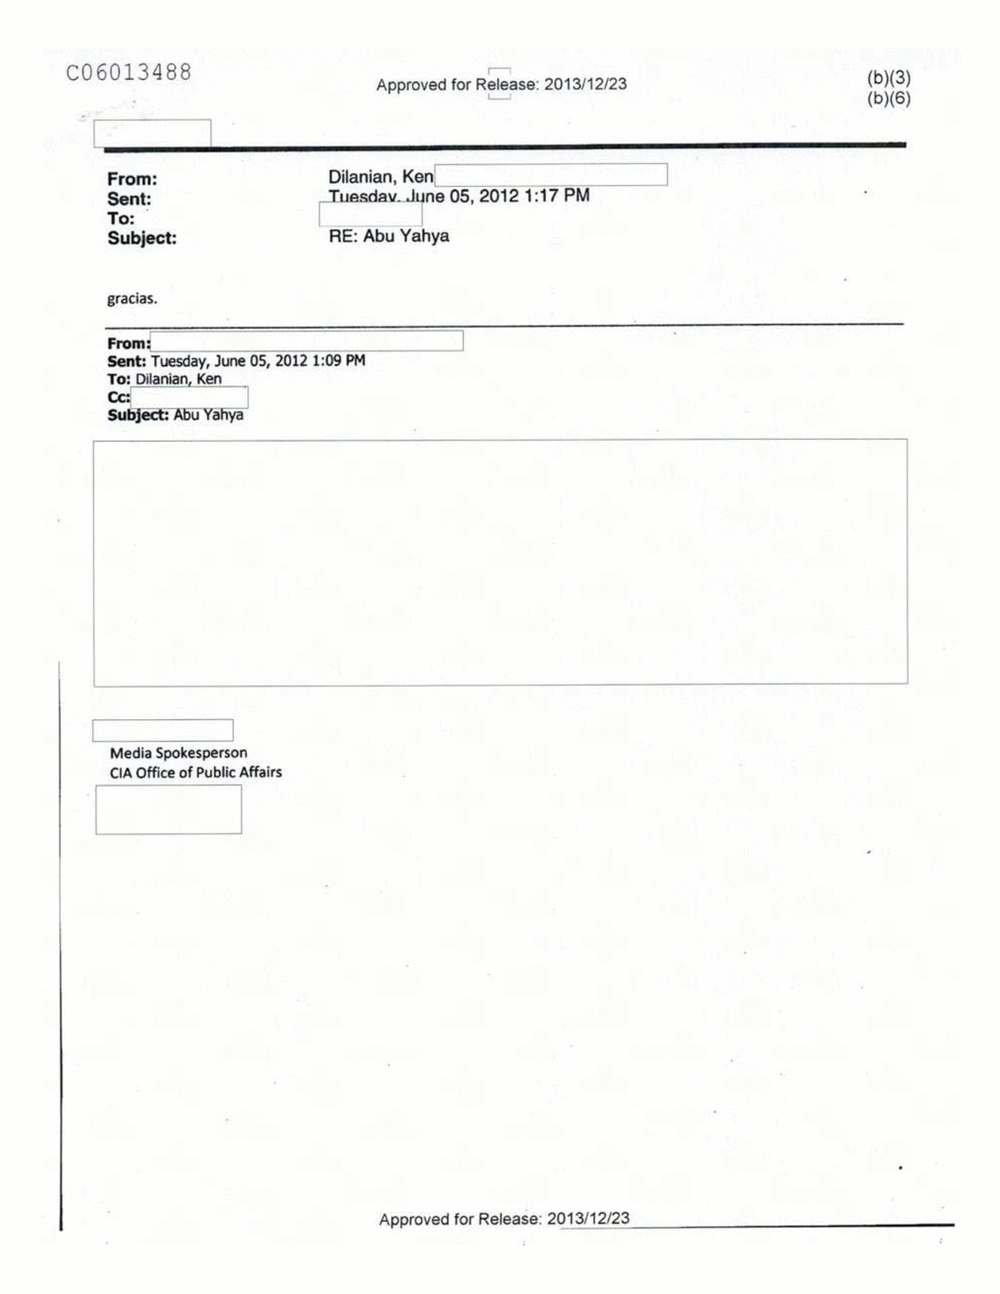 Page 337 from Email Correspondence Between Reporters and CIA Flacks